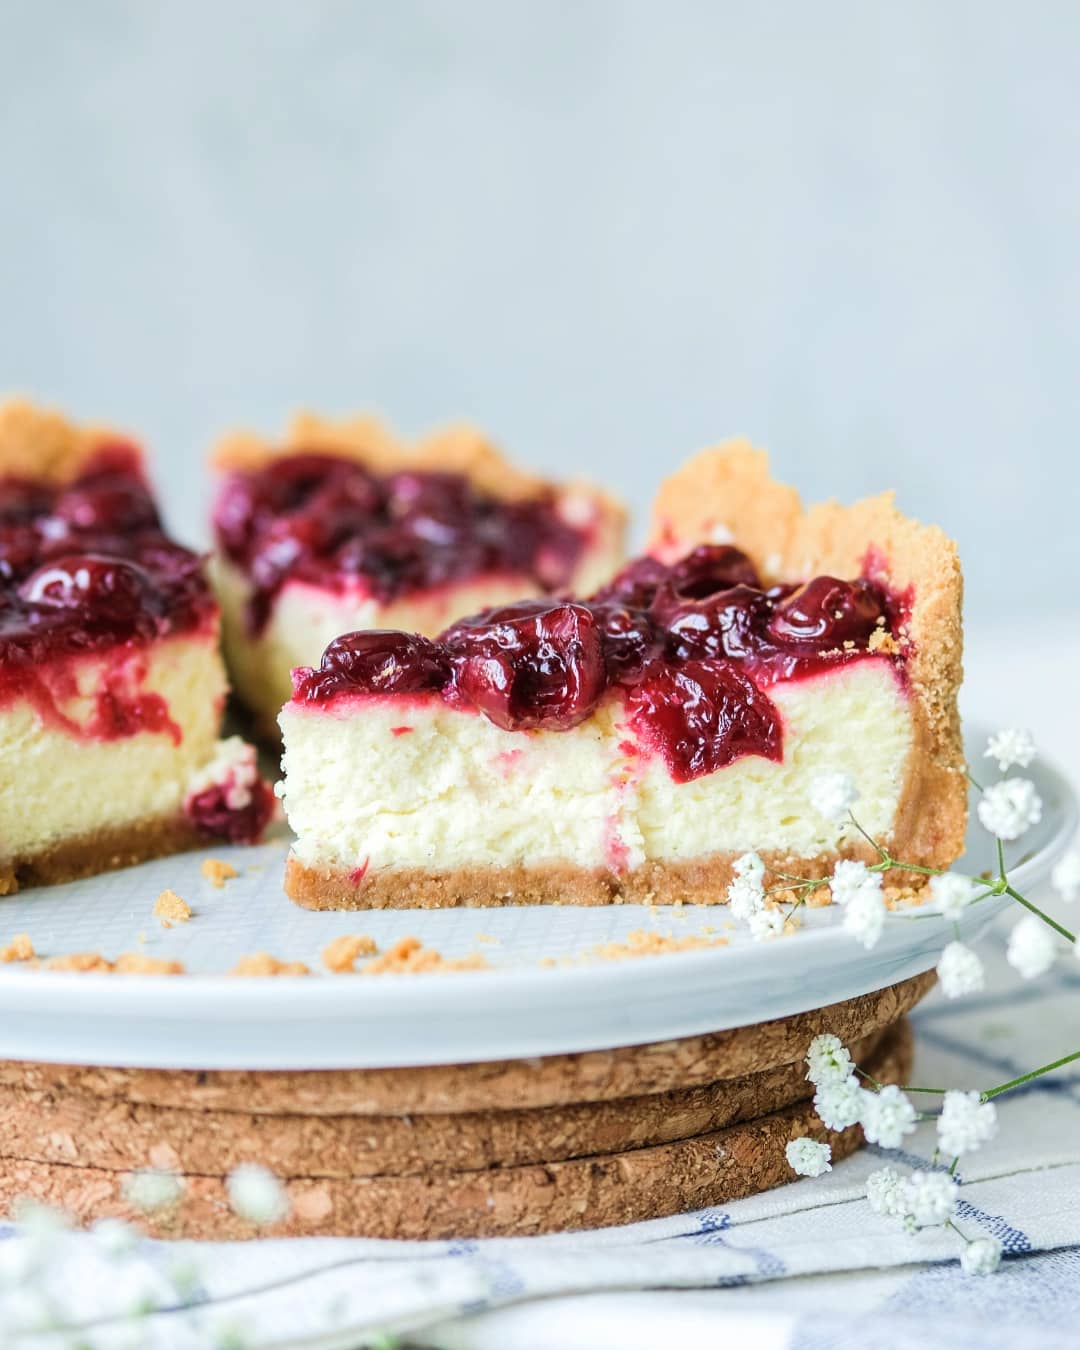 Classic cheesecake with cherry compote